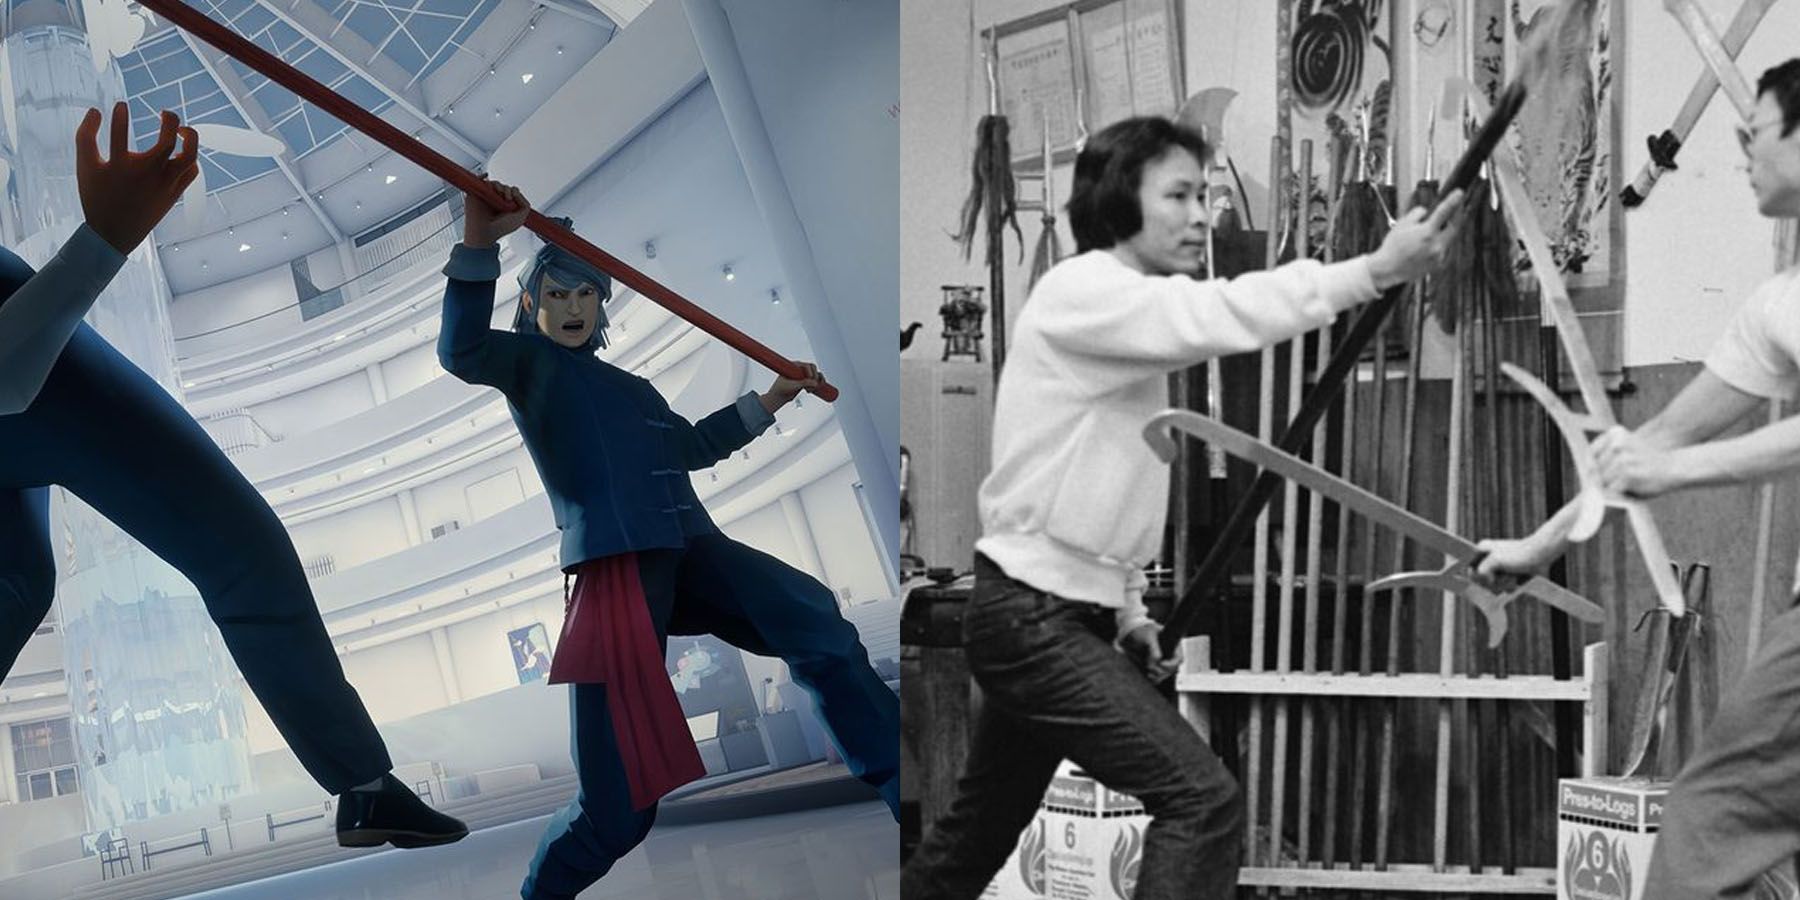 The Student using a staff compared to a Bak Mei martial artist